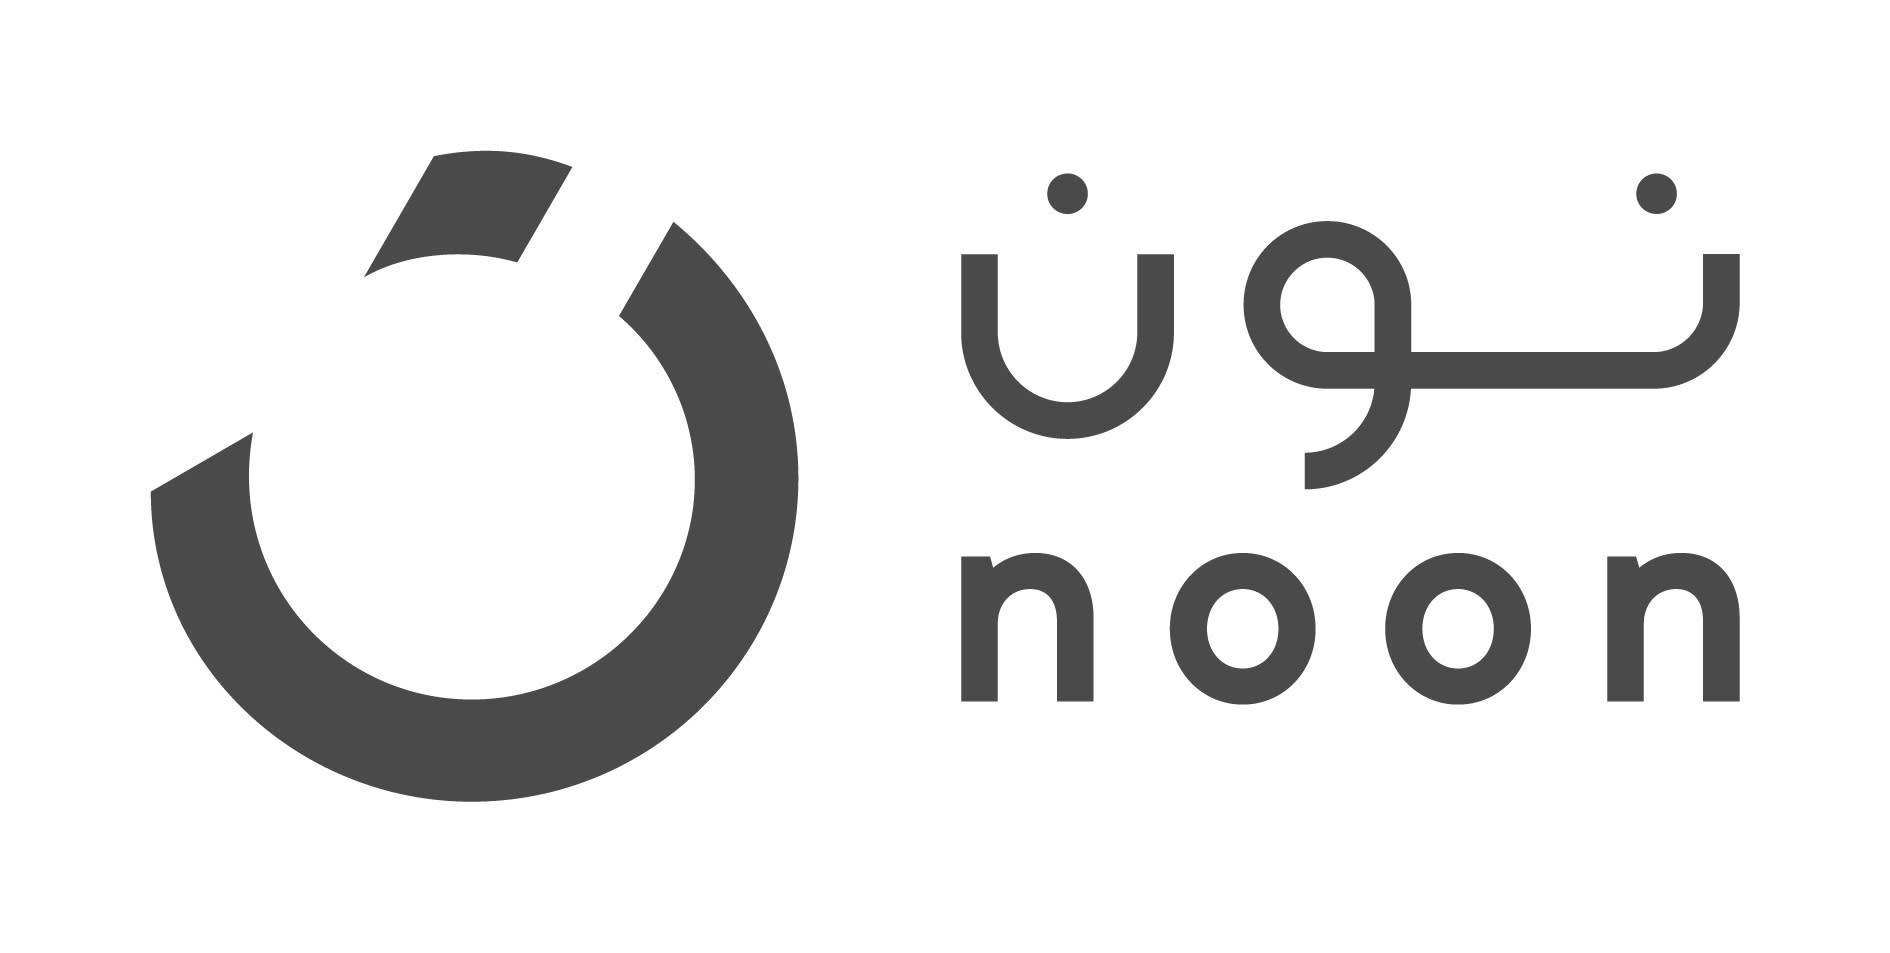 Mideast online retailer noon.com expands to China